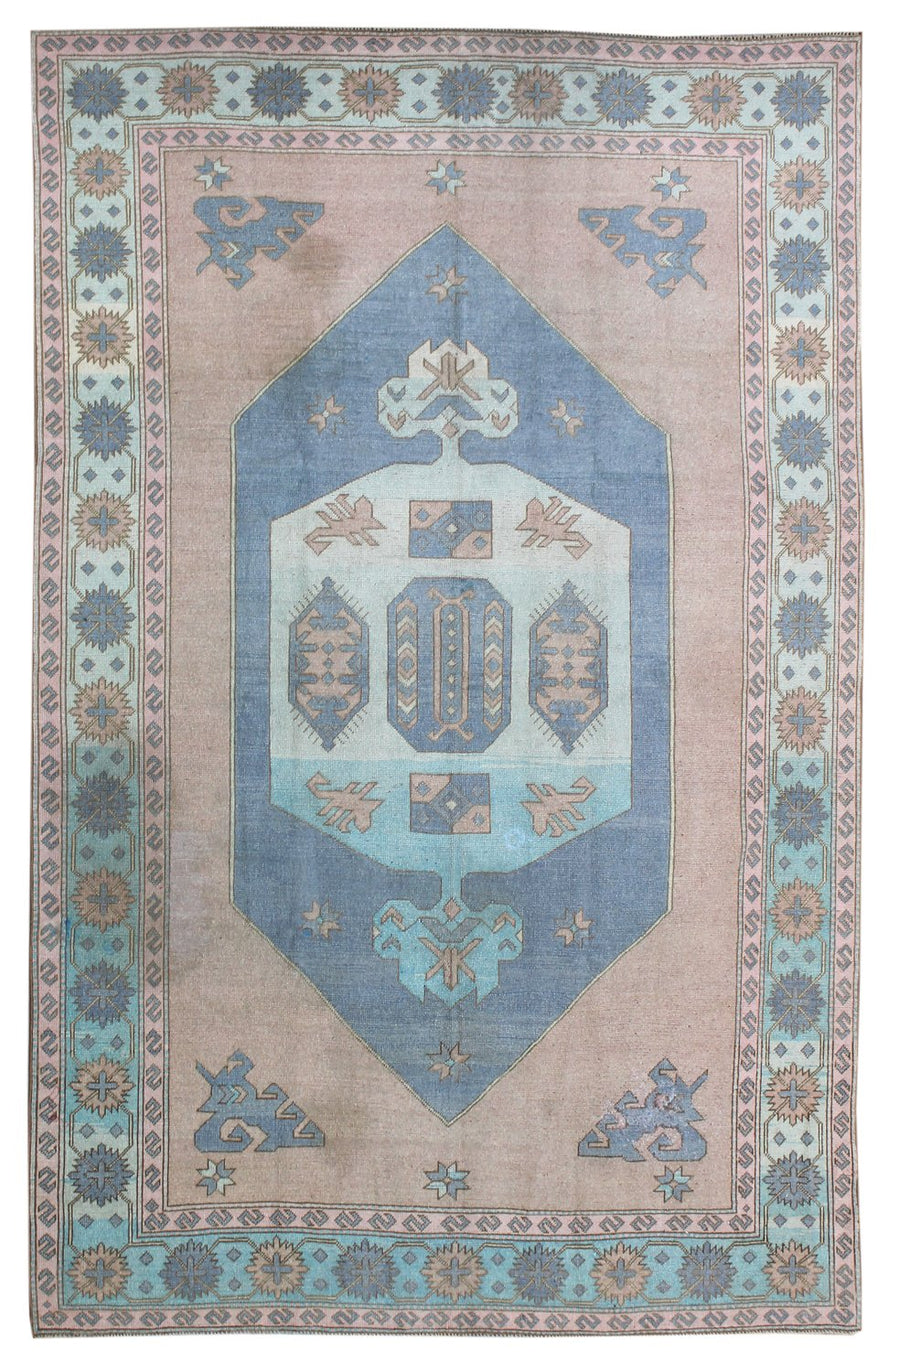 SULTANABAD HANDKNOTTED RUG, J58755